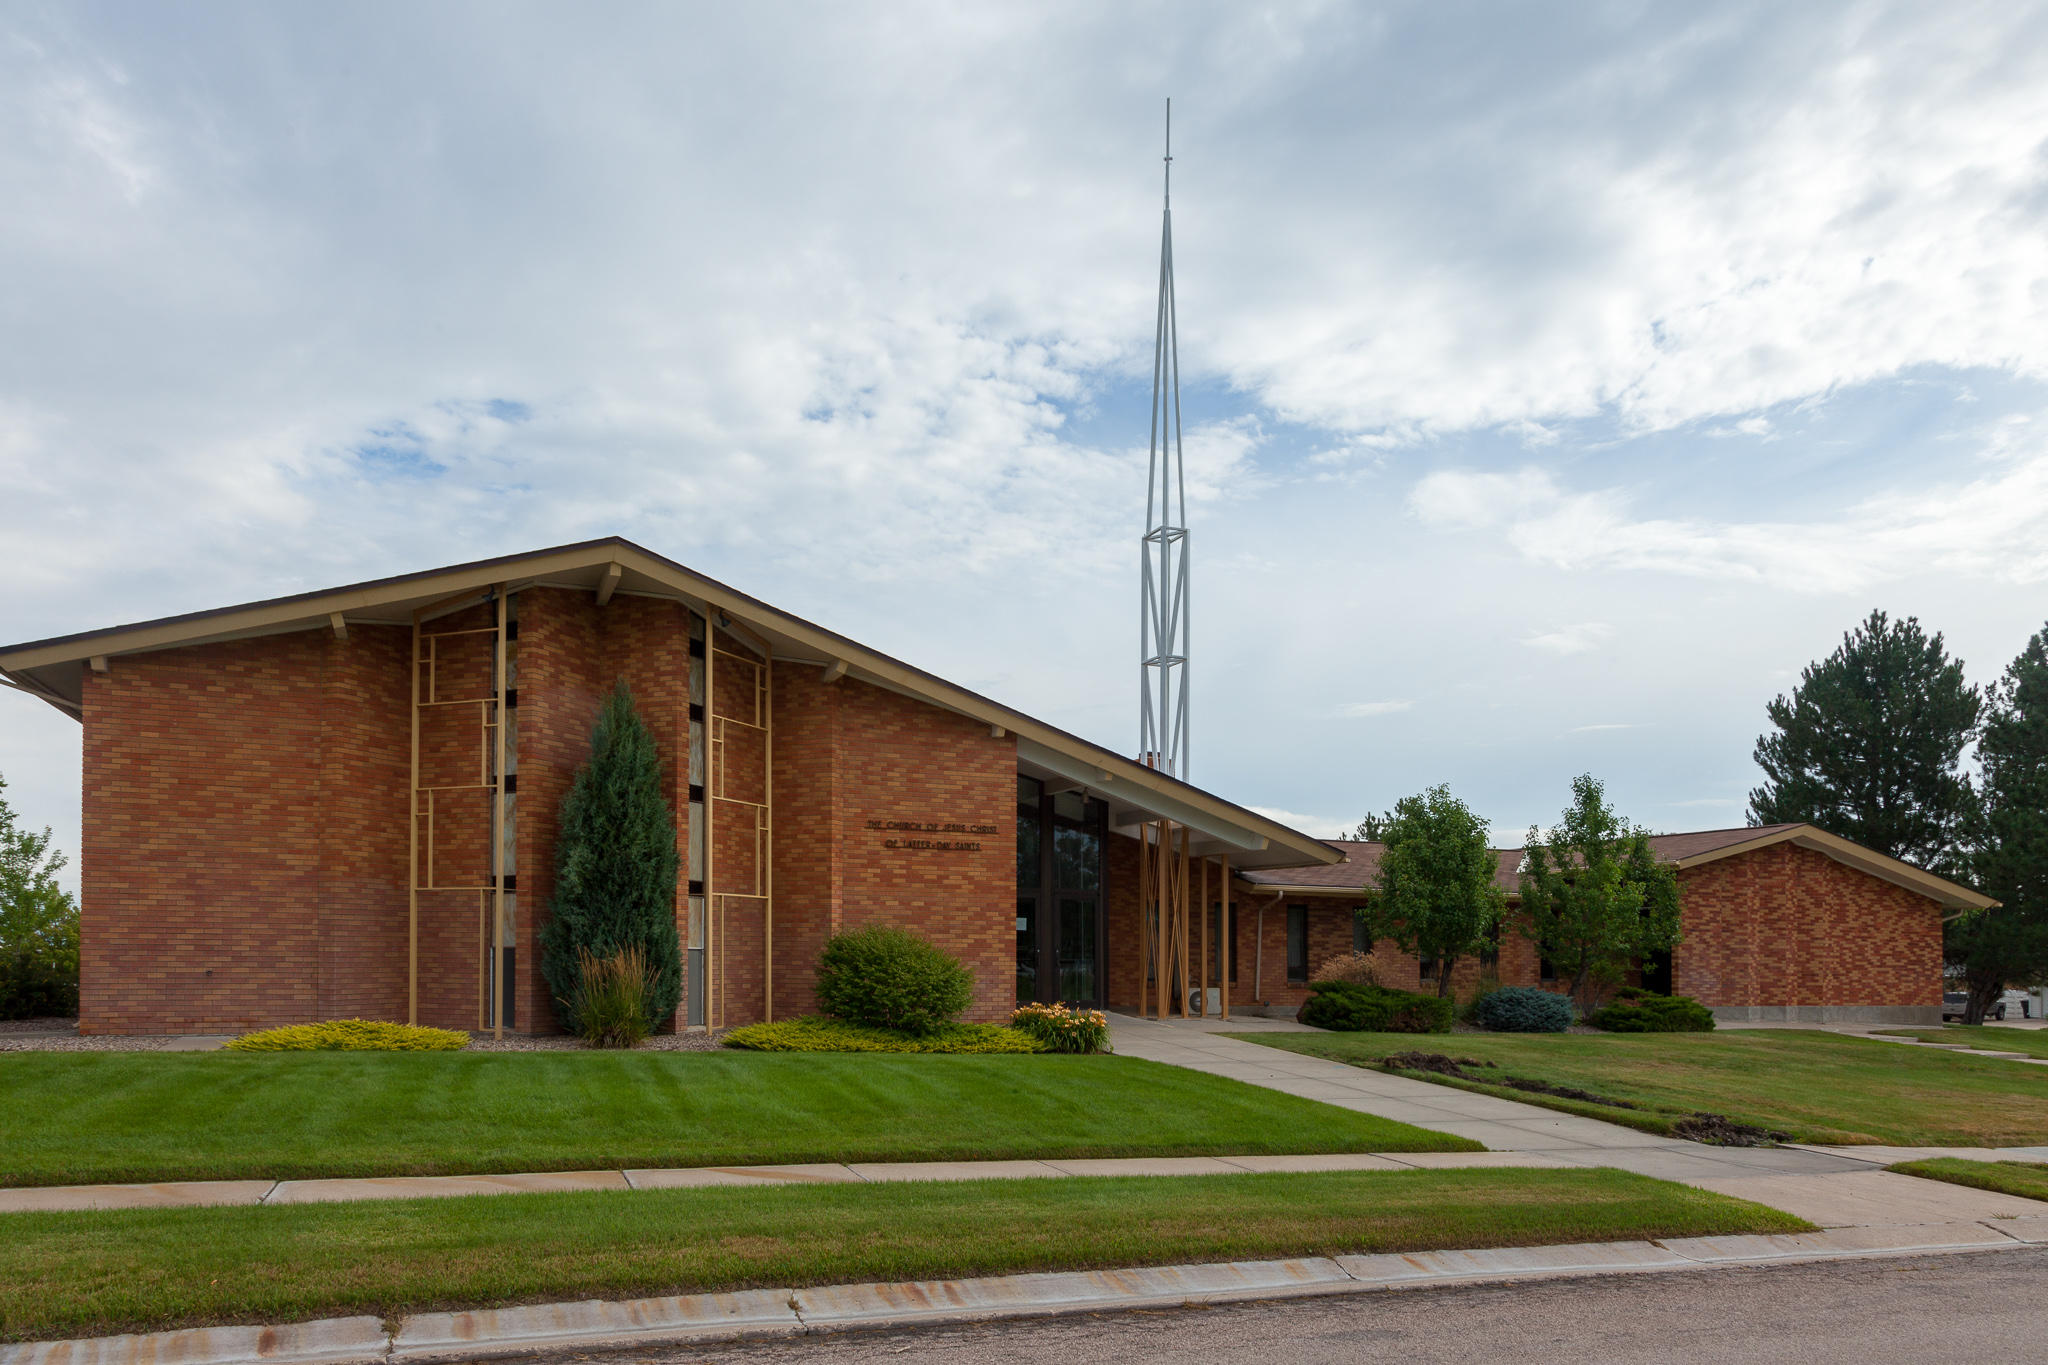 The Church of Jesus Christ of Latter-day Saints, Belle Fourche SD 57717-2143